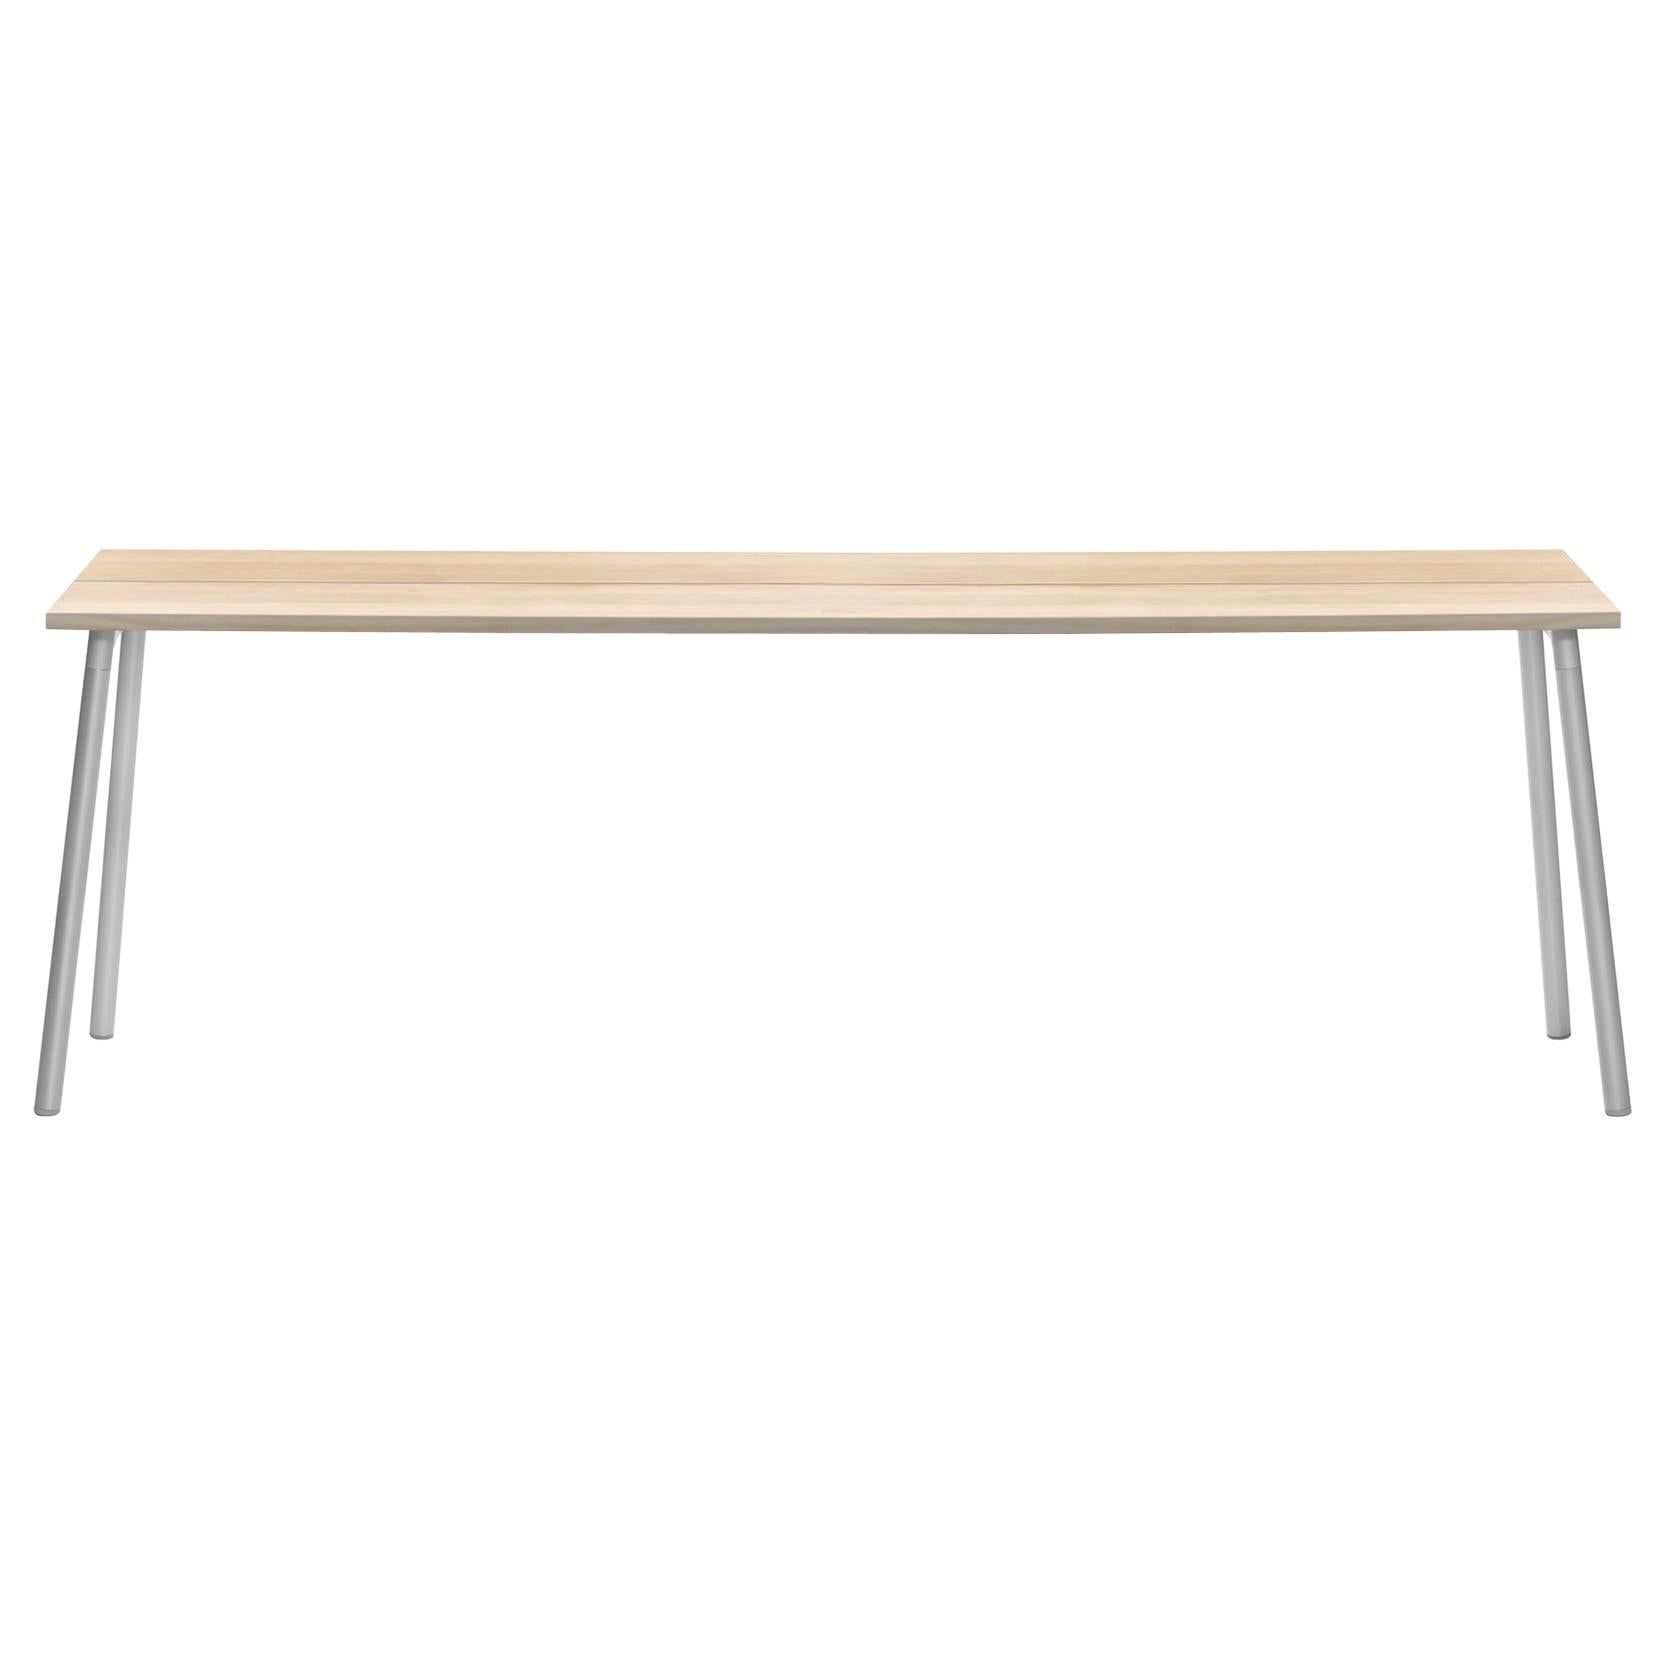 Emeco Run 86" Side Table Aluminum Frame & Wood Top by Sam Hecht and Kim Colin For Sale